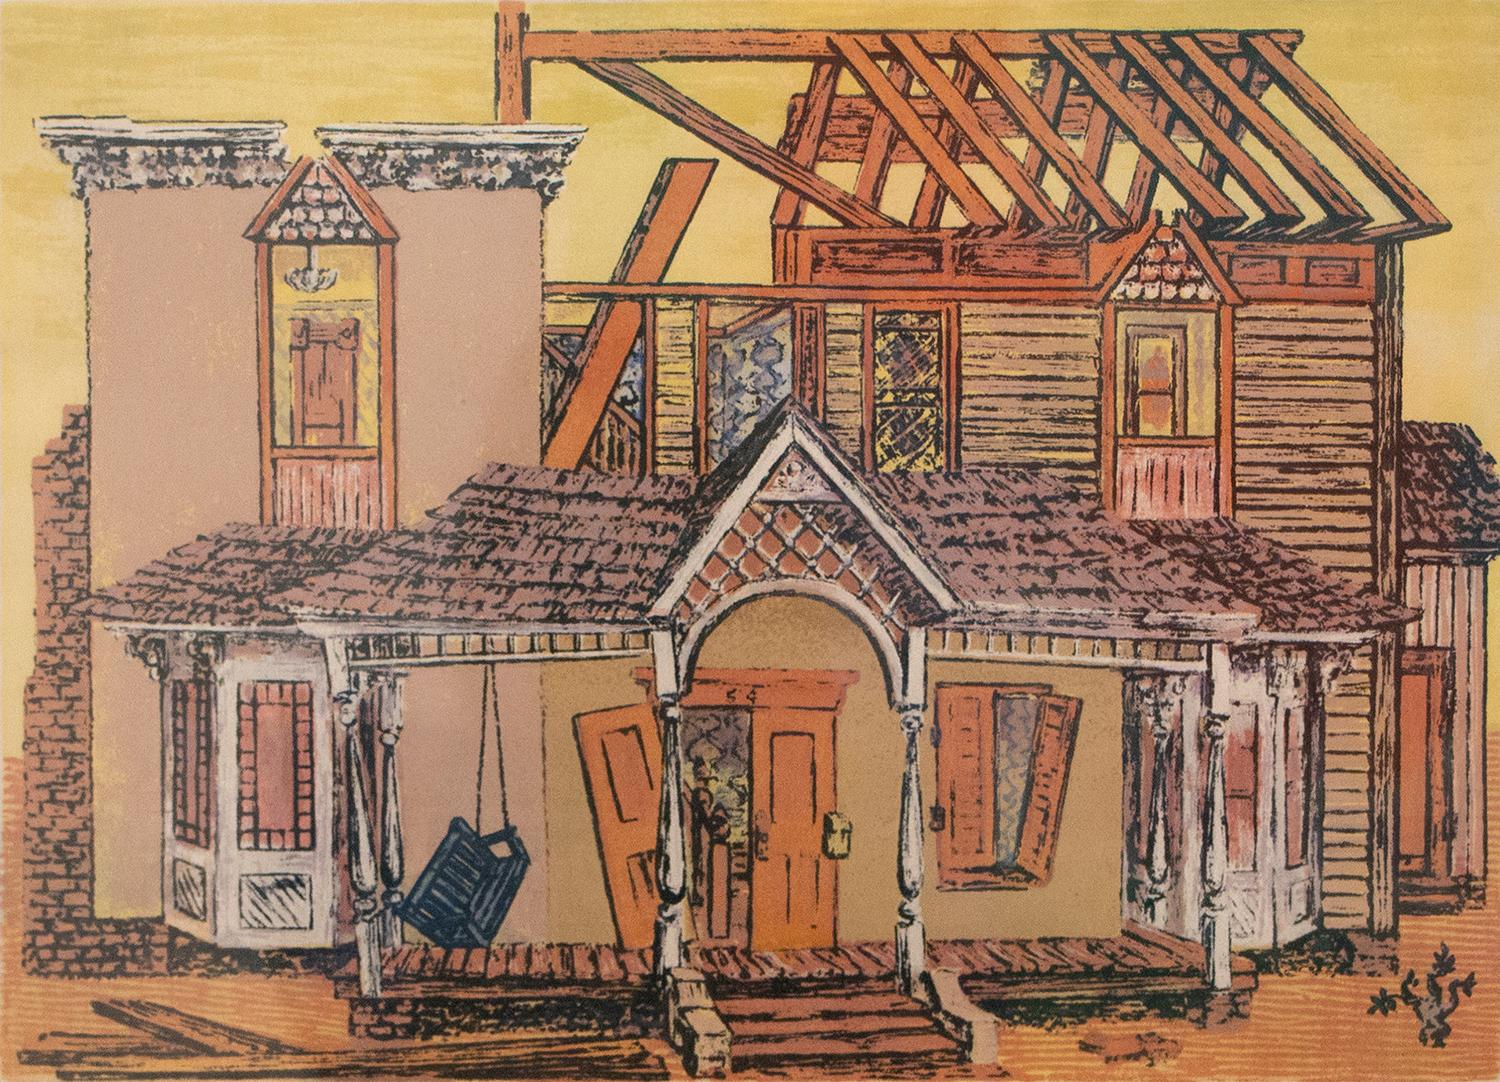 "The Porch Swing," Serigraph by Janet Turner, circa 1950s